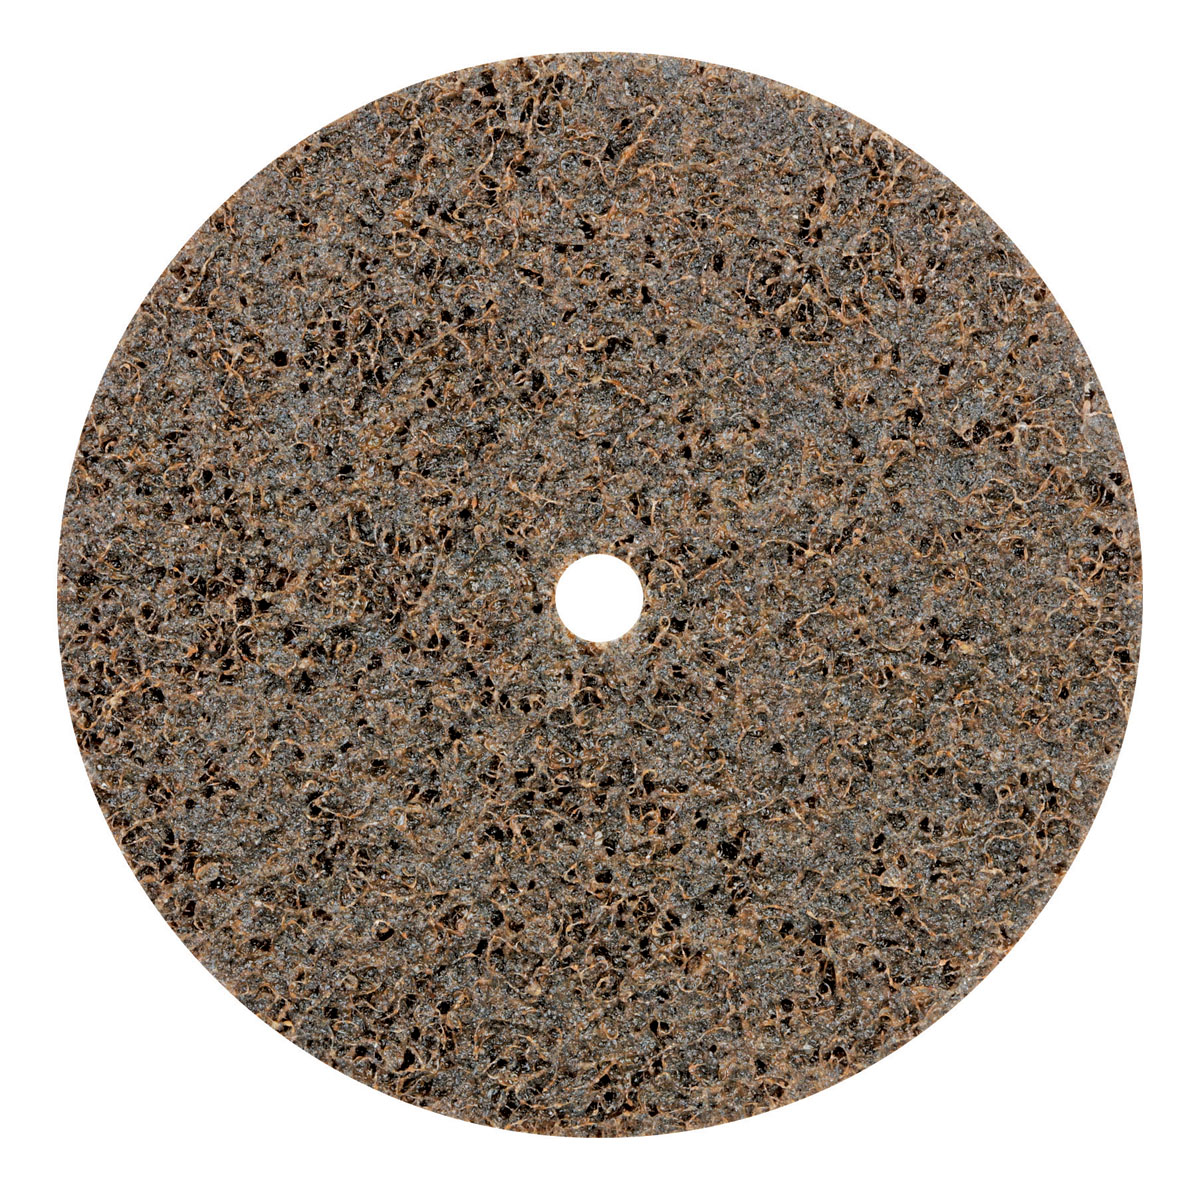 4-1/2" (114 mm) Dia. x 3/8" Coarse DynaBrite Surface Conditioning Disc